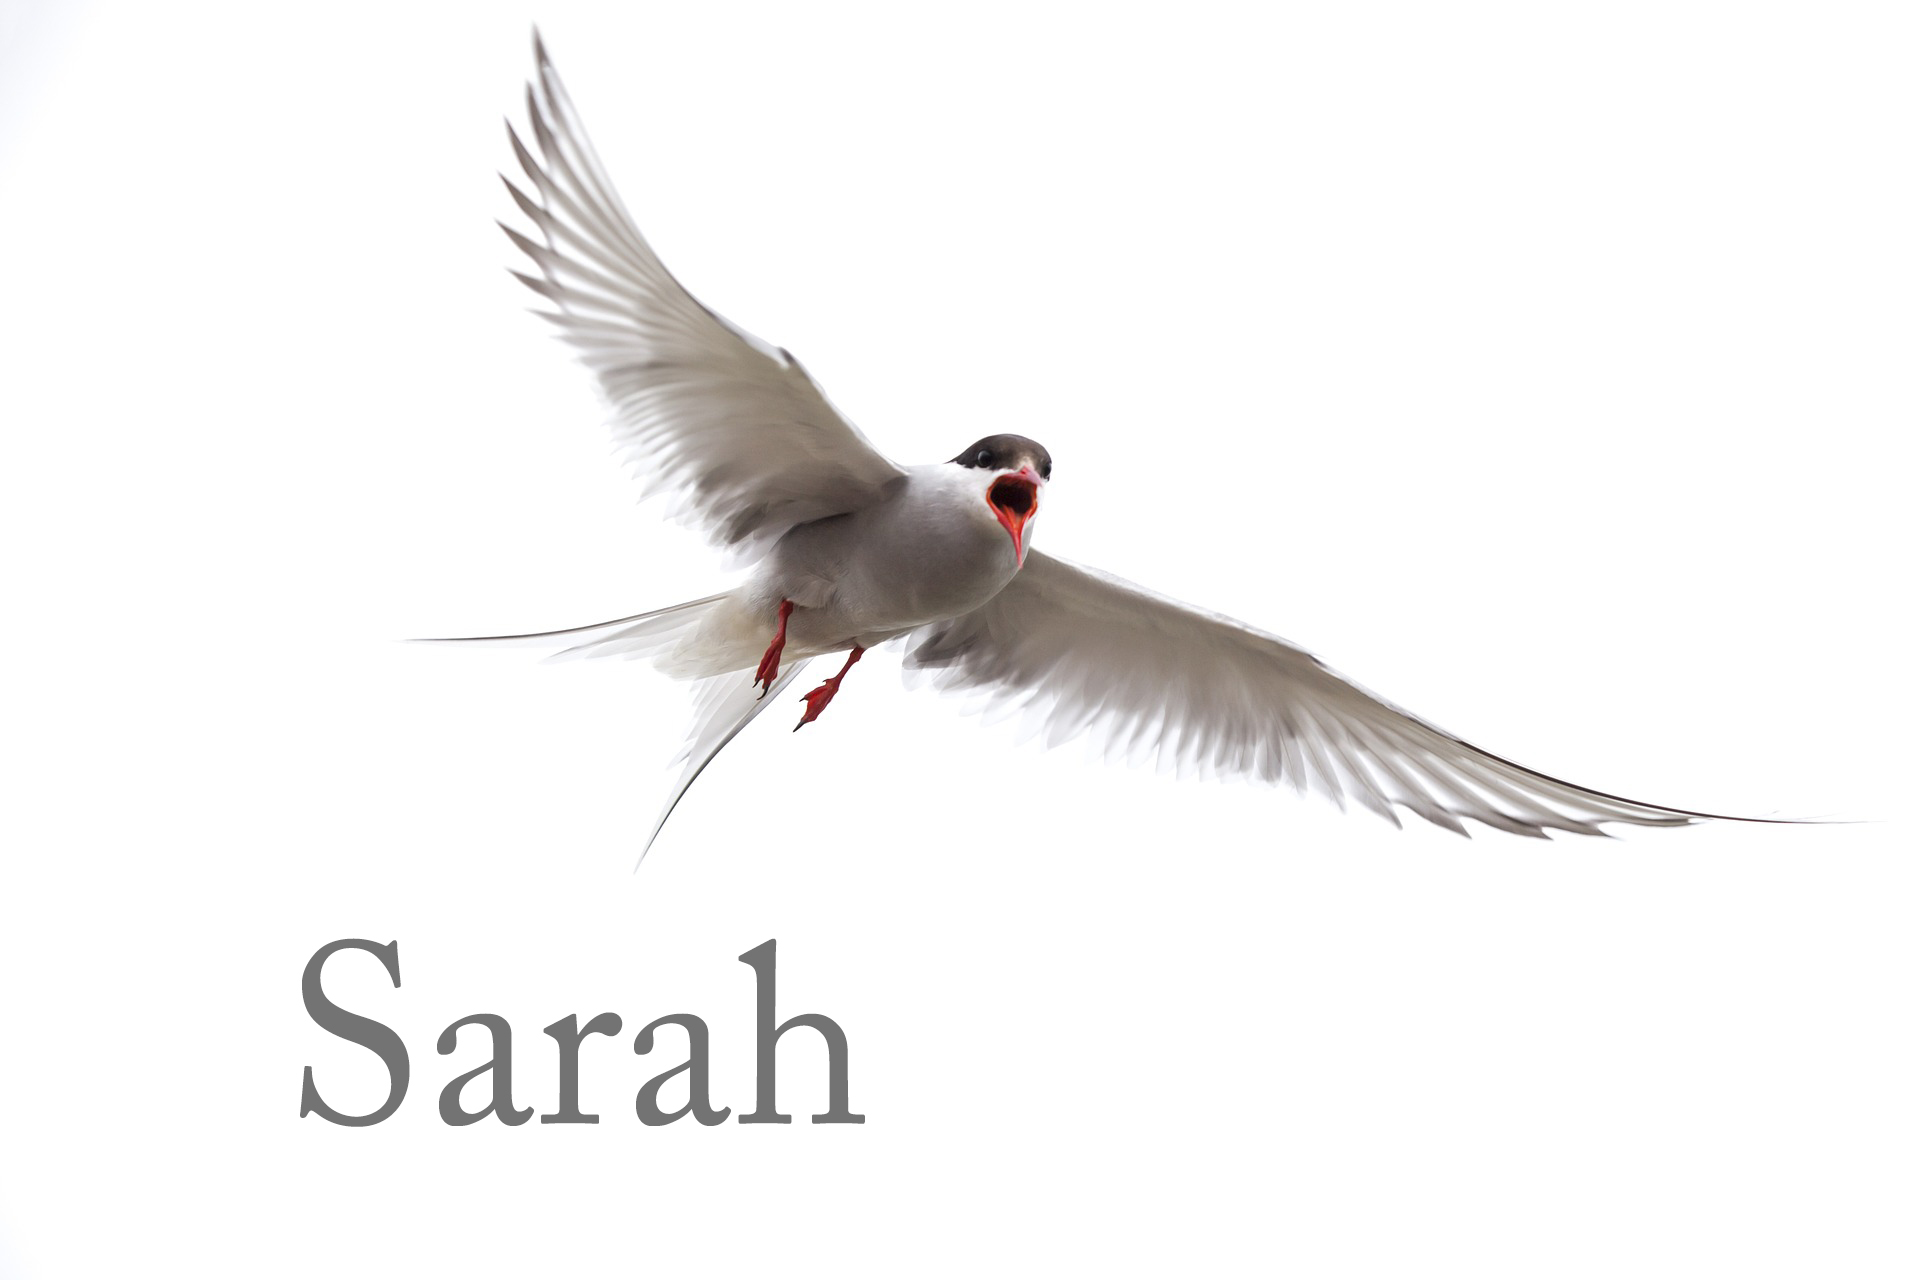 See Sarah's page